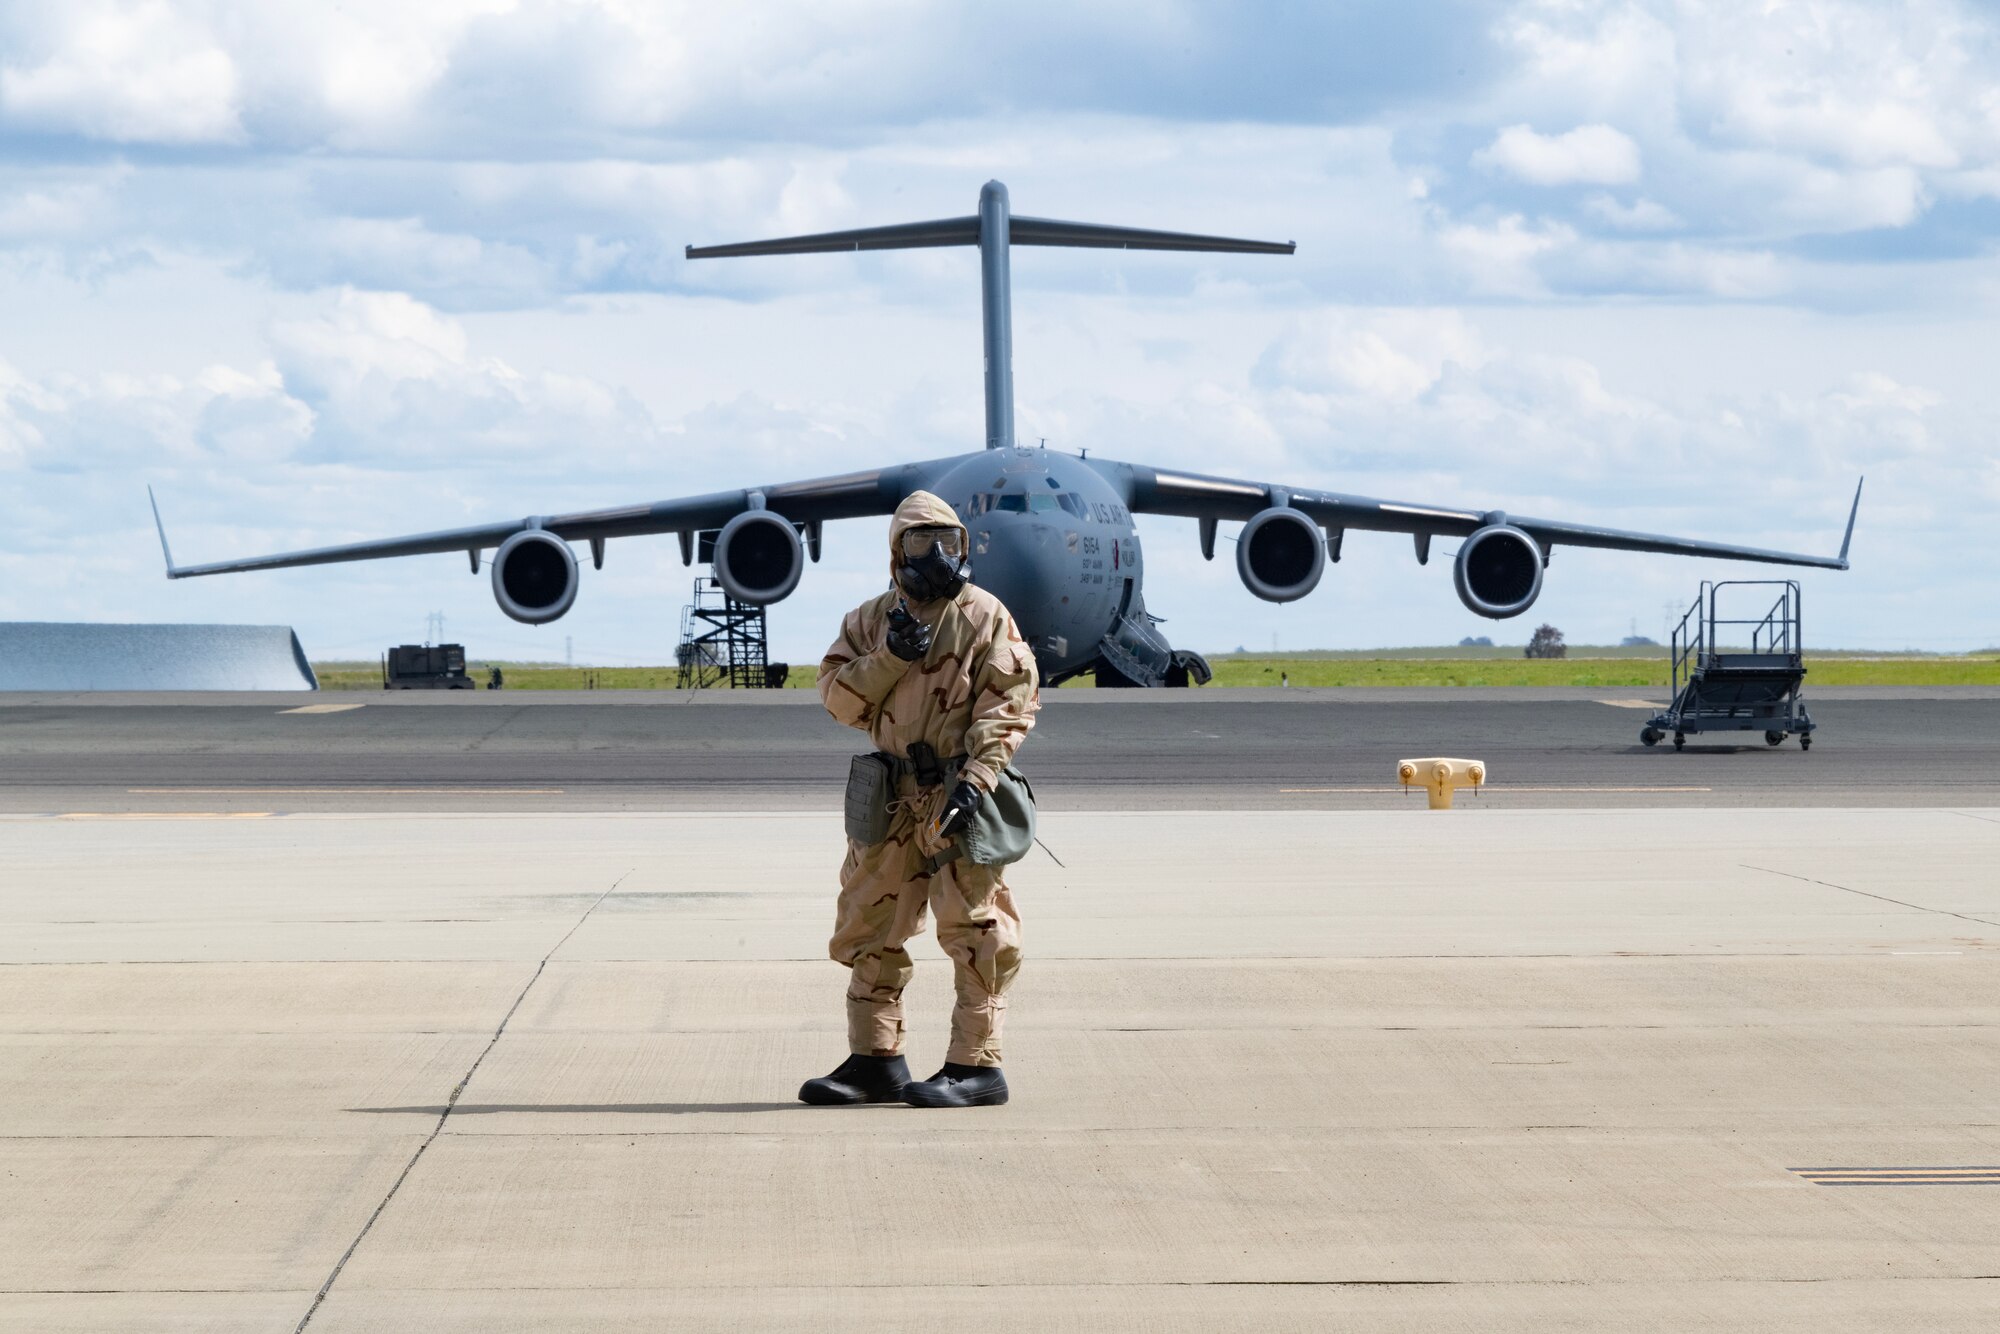 Airman stands in front of a C-17 Globemaster III aircraft